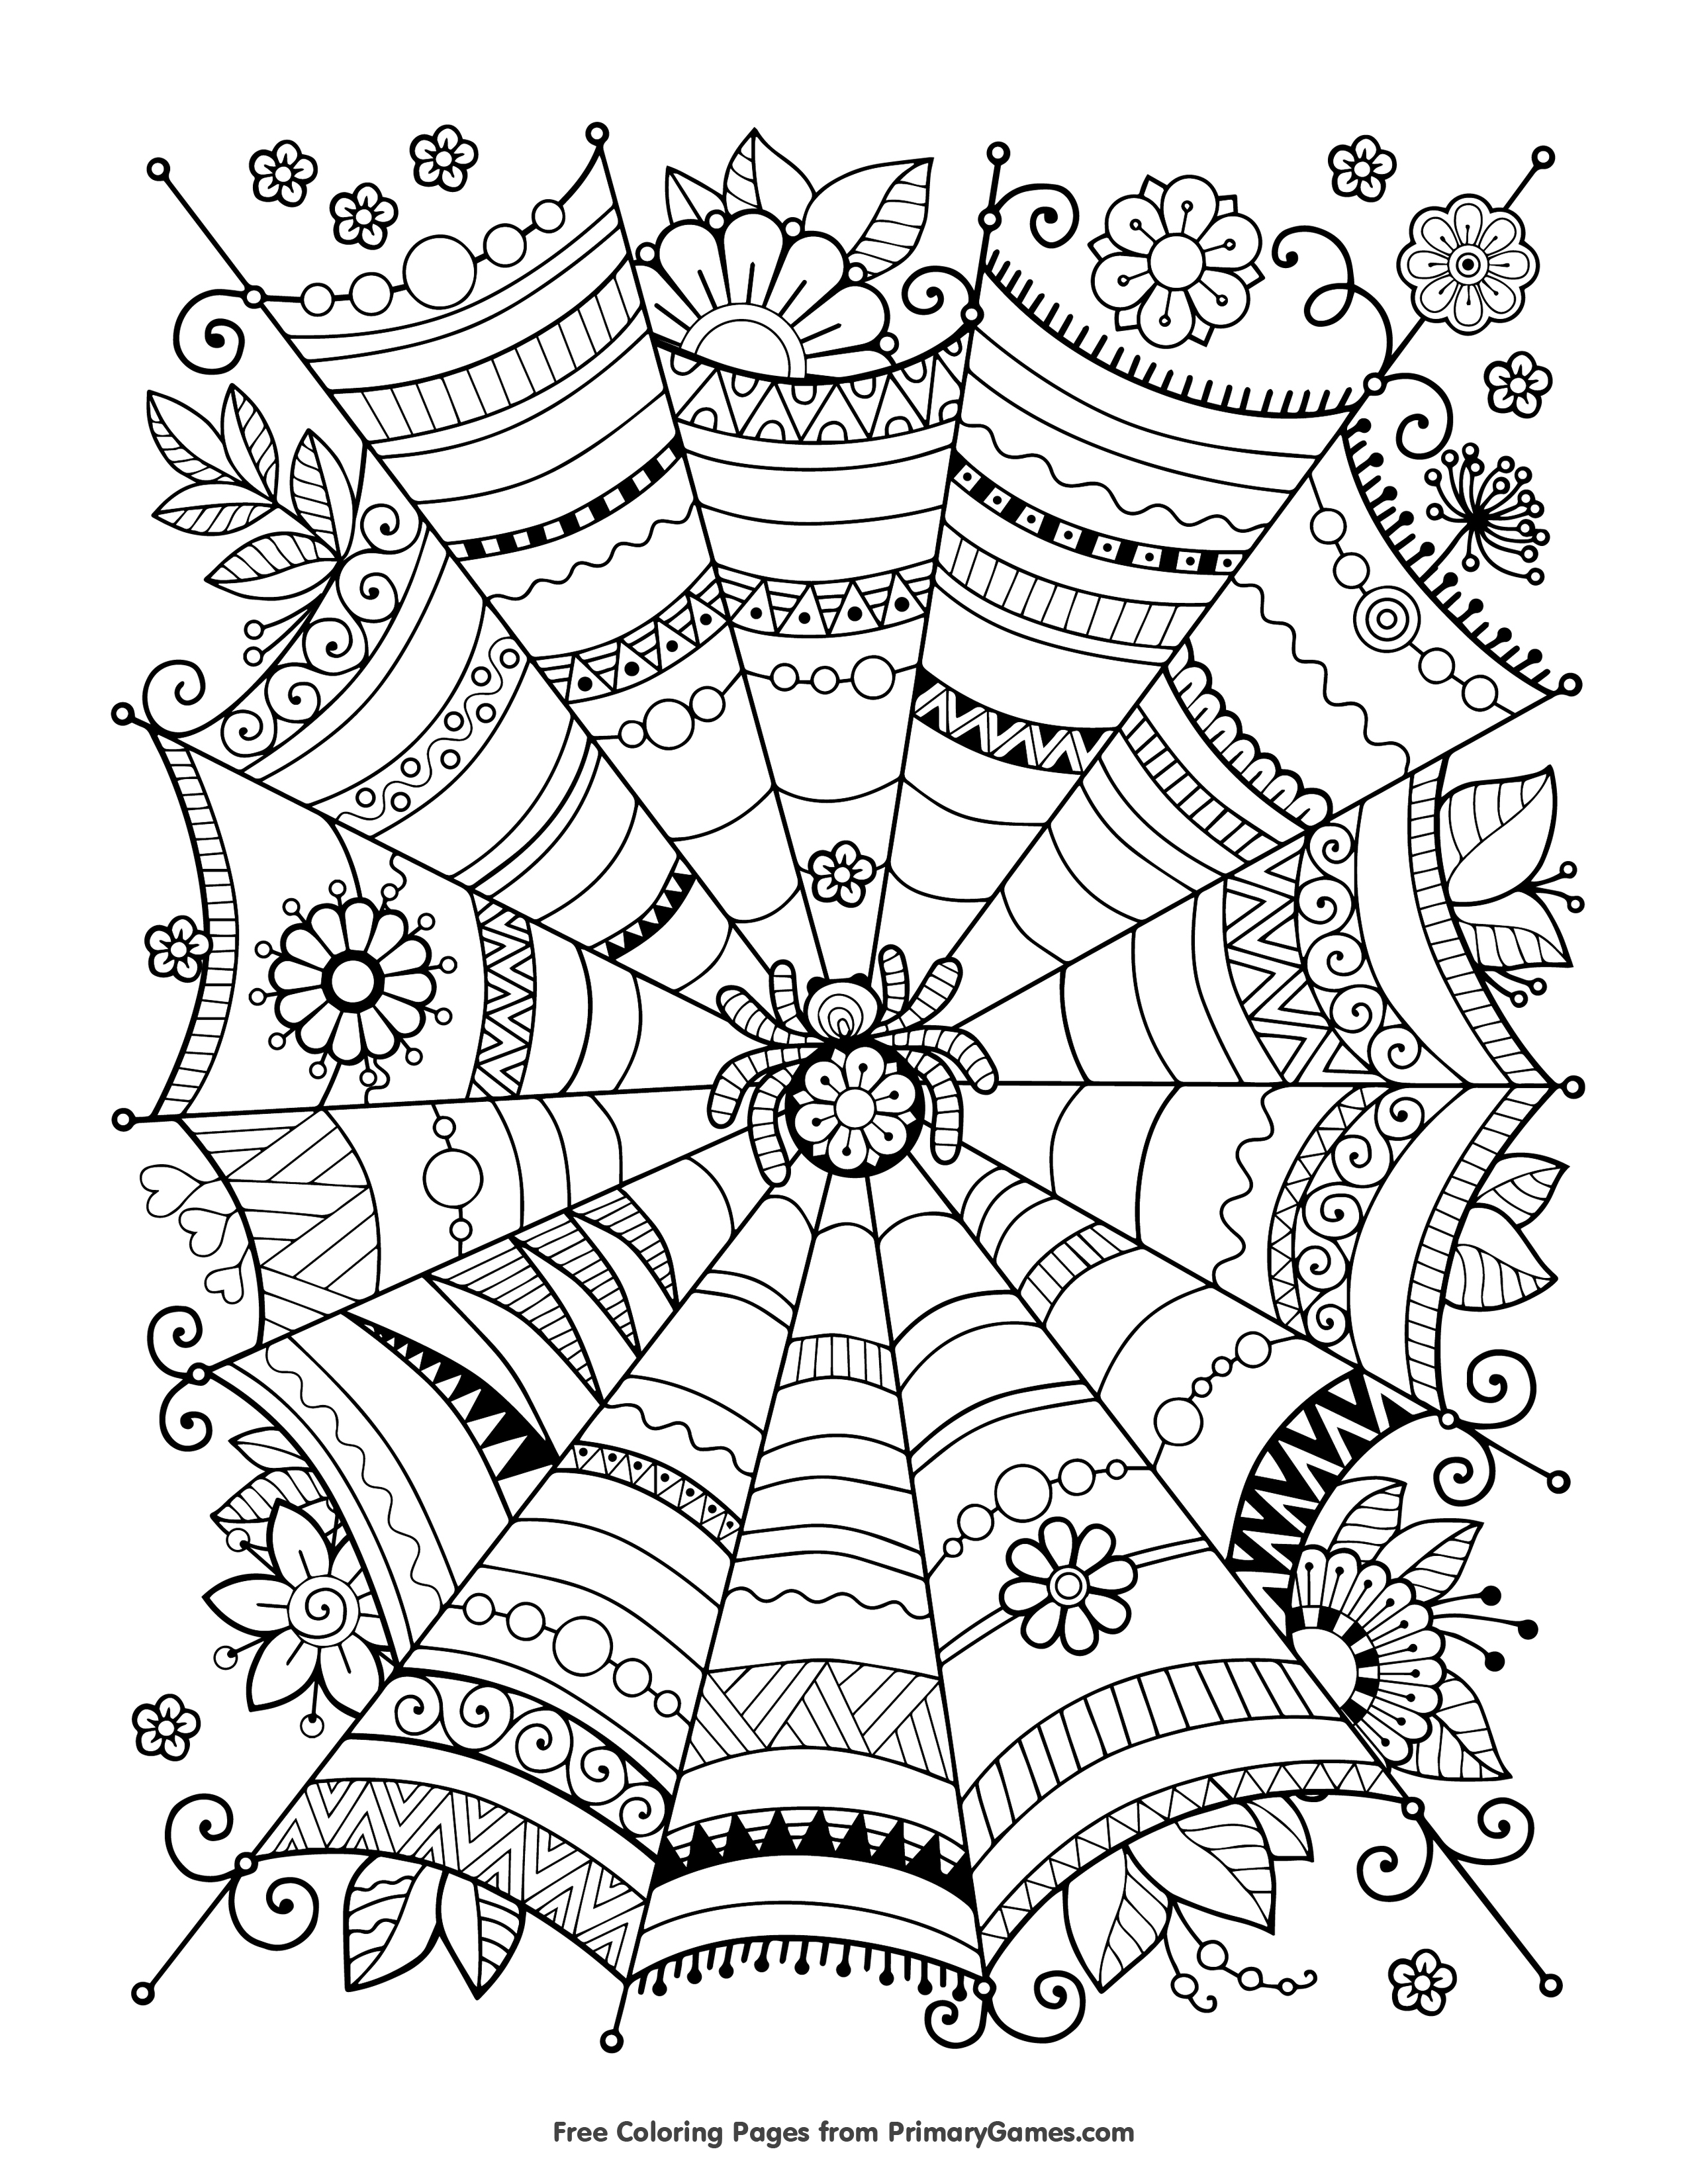 Free Halloween Coloring Pages For Adults Amp Kids Happiness